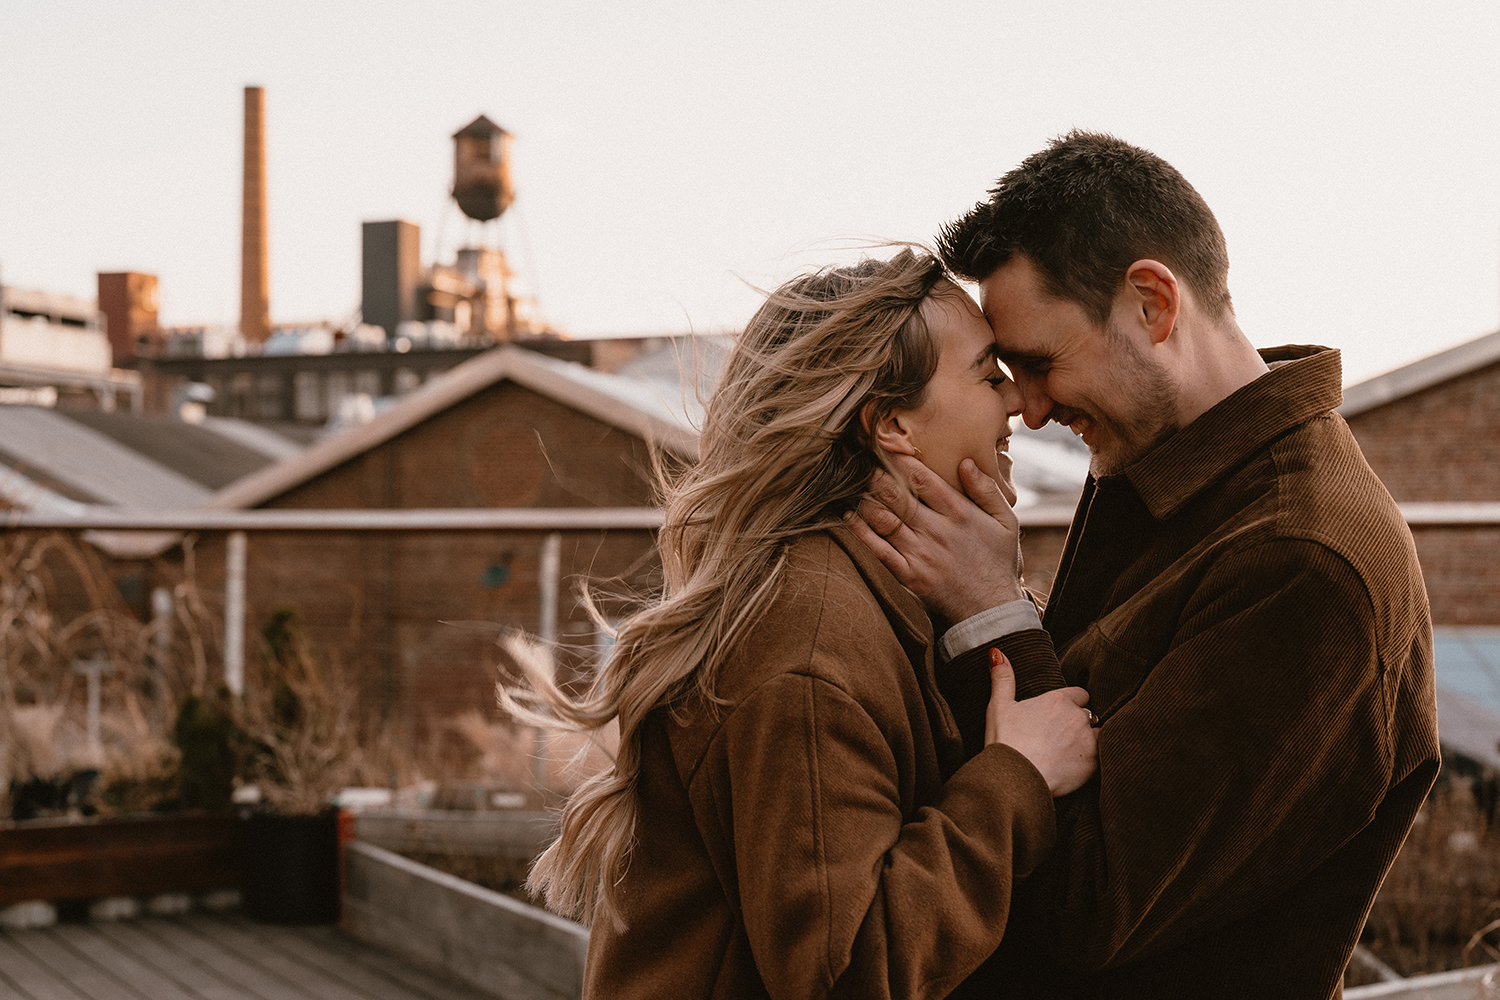 Cozy rooftop snuggles during an engagement photoshoot in Williamsburg during golden hour.